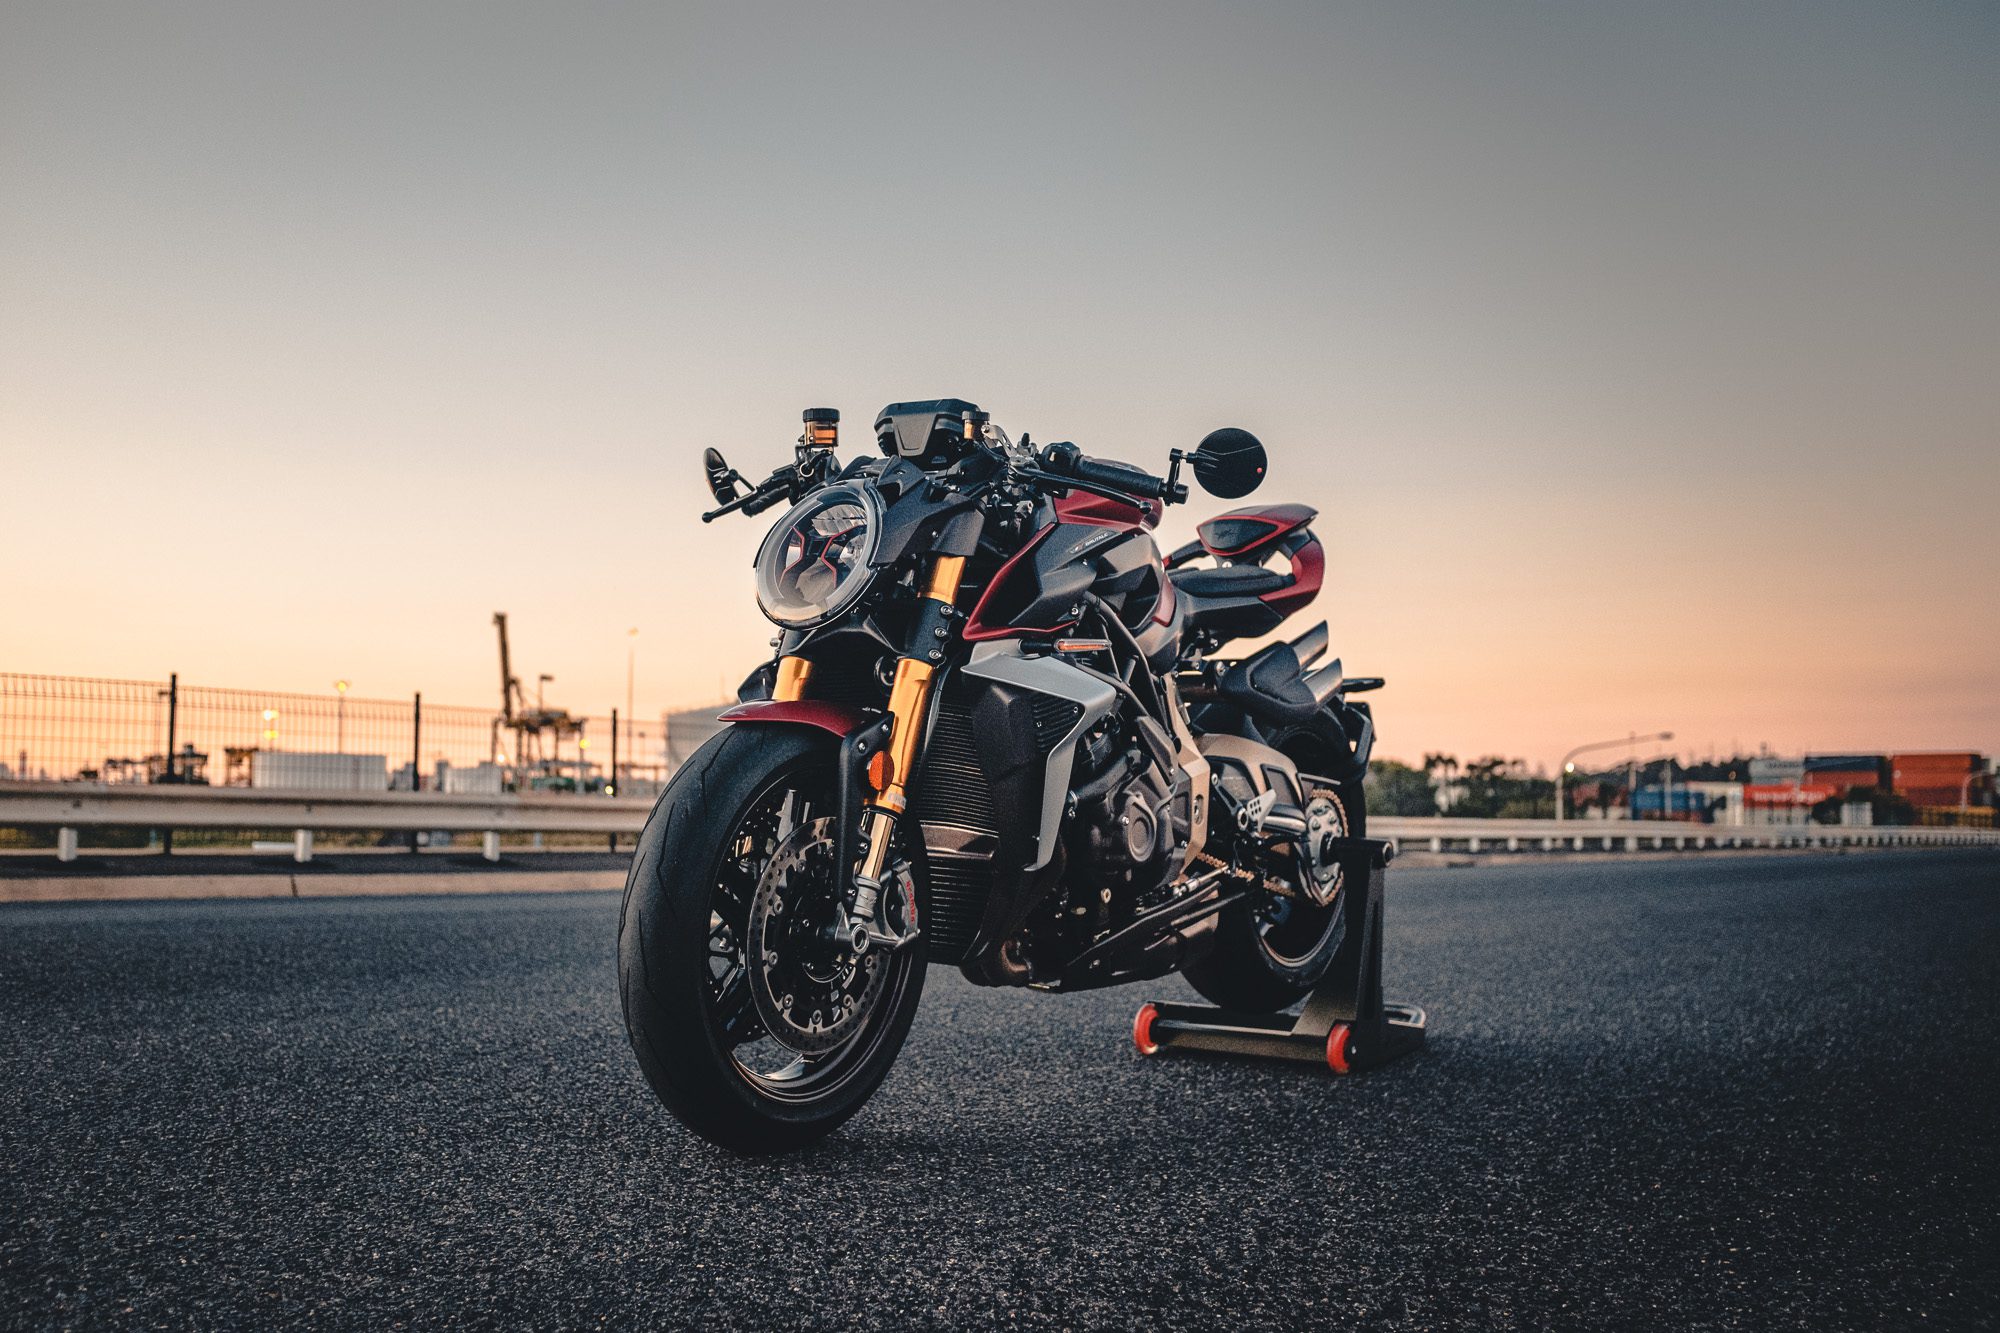 A MV Agusta Brutale motorcycle on an industrial road at sunset